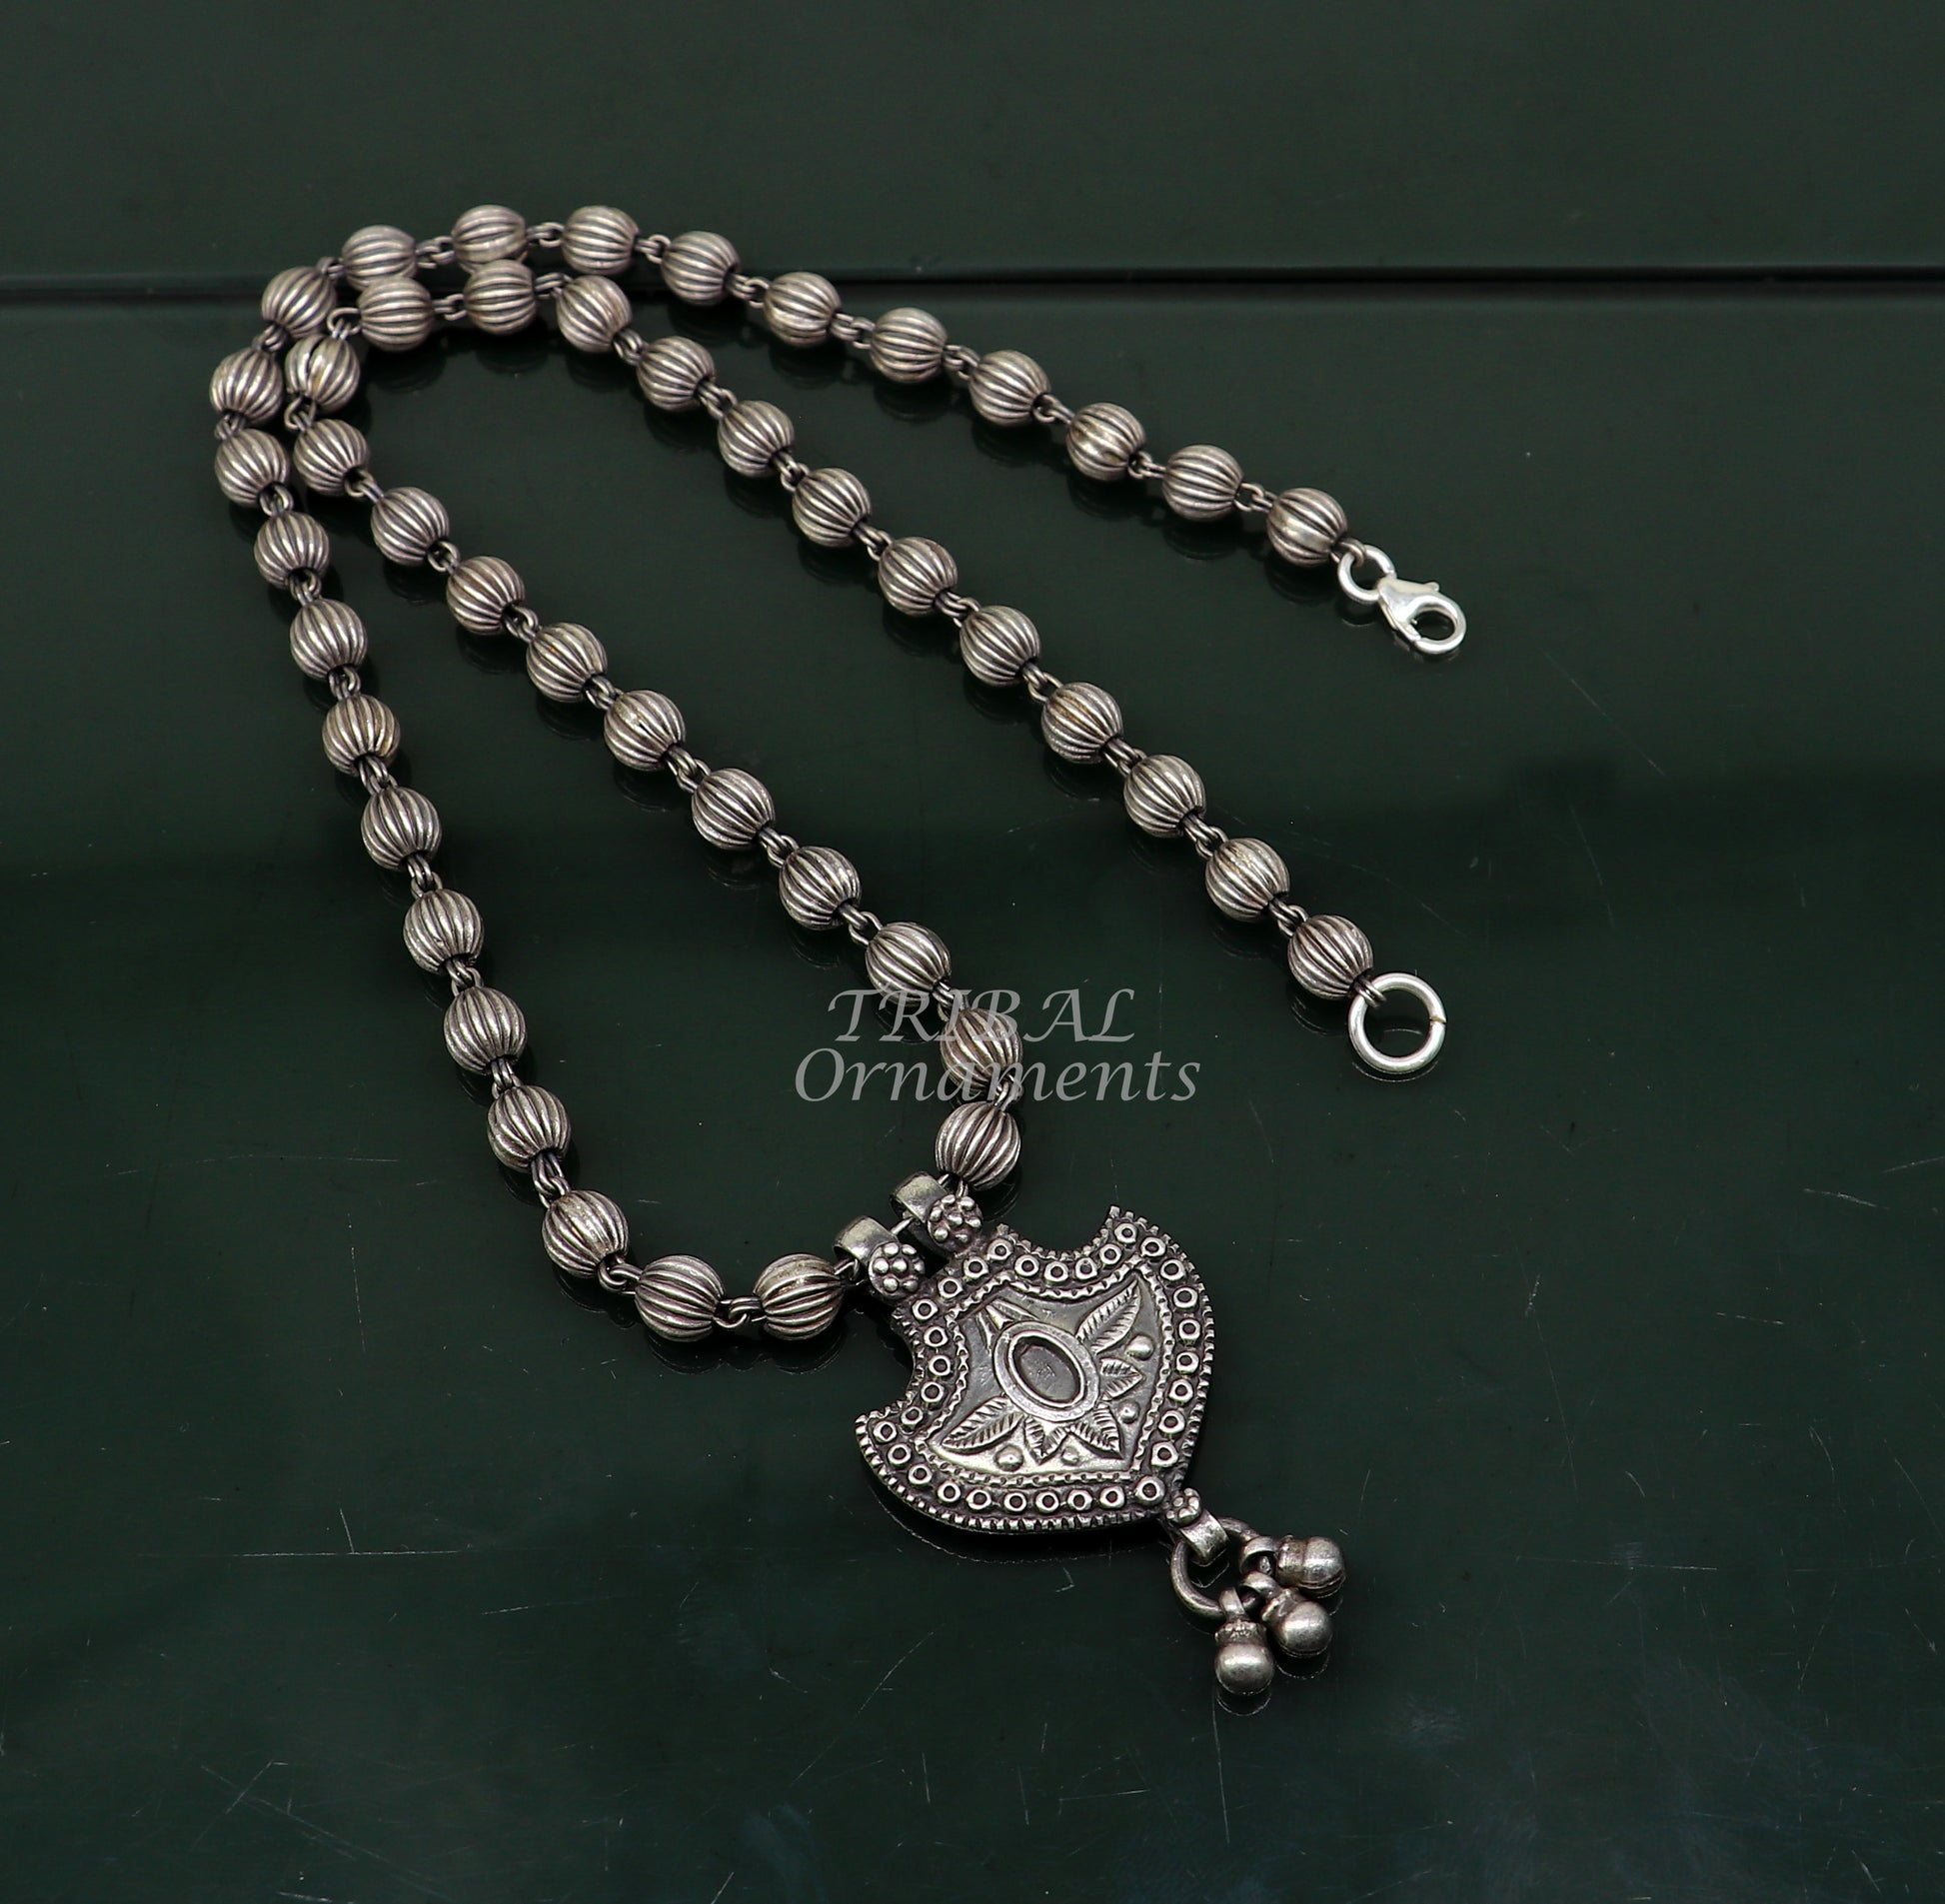 6mm beads ball and fabulous pendant traditional cultural 925 sterling silver necklace, modern trendy functional necklace set540 - TRIBAL ORNAMENTS